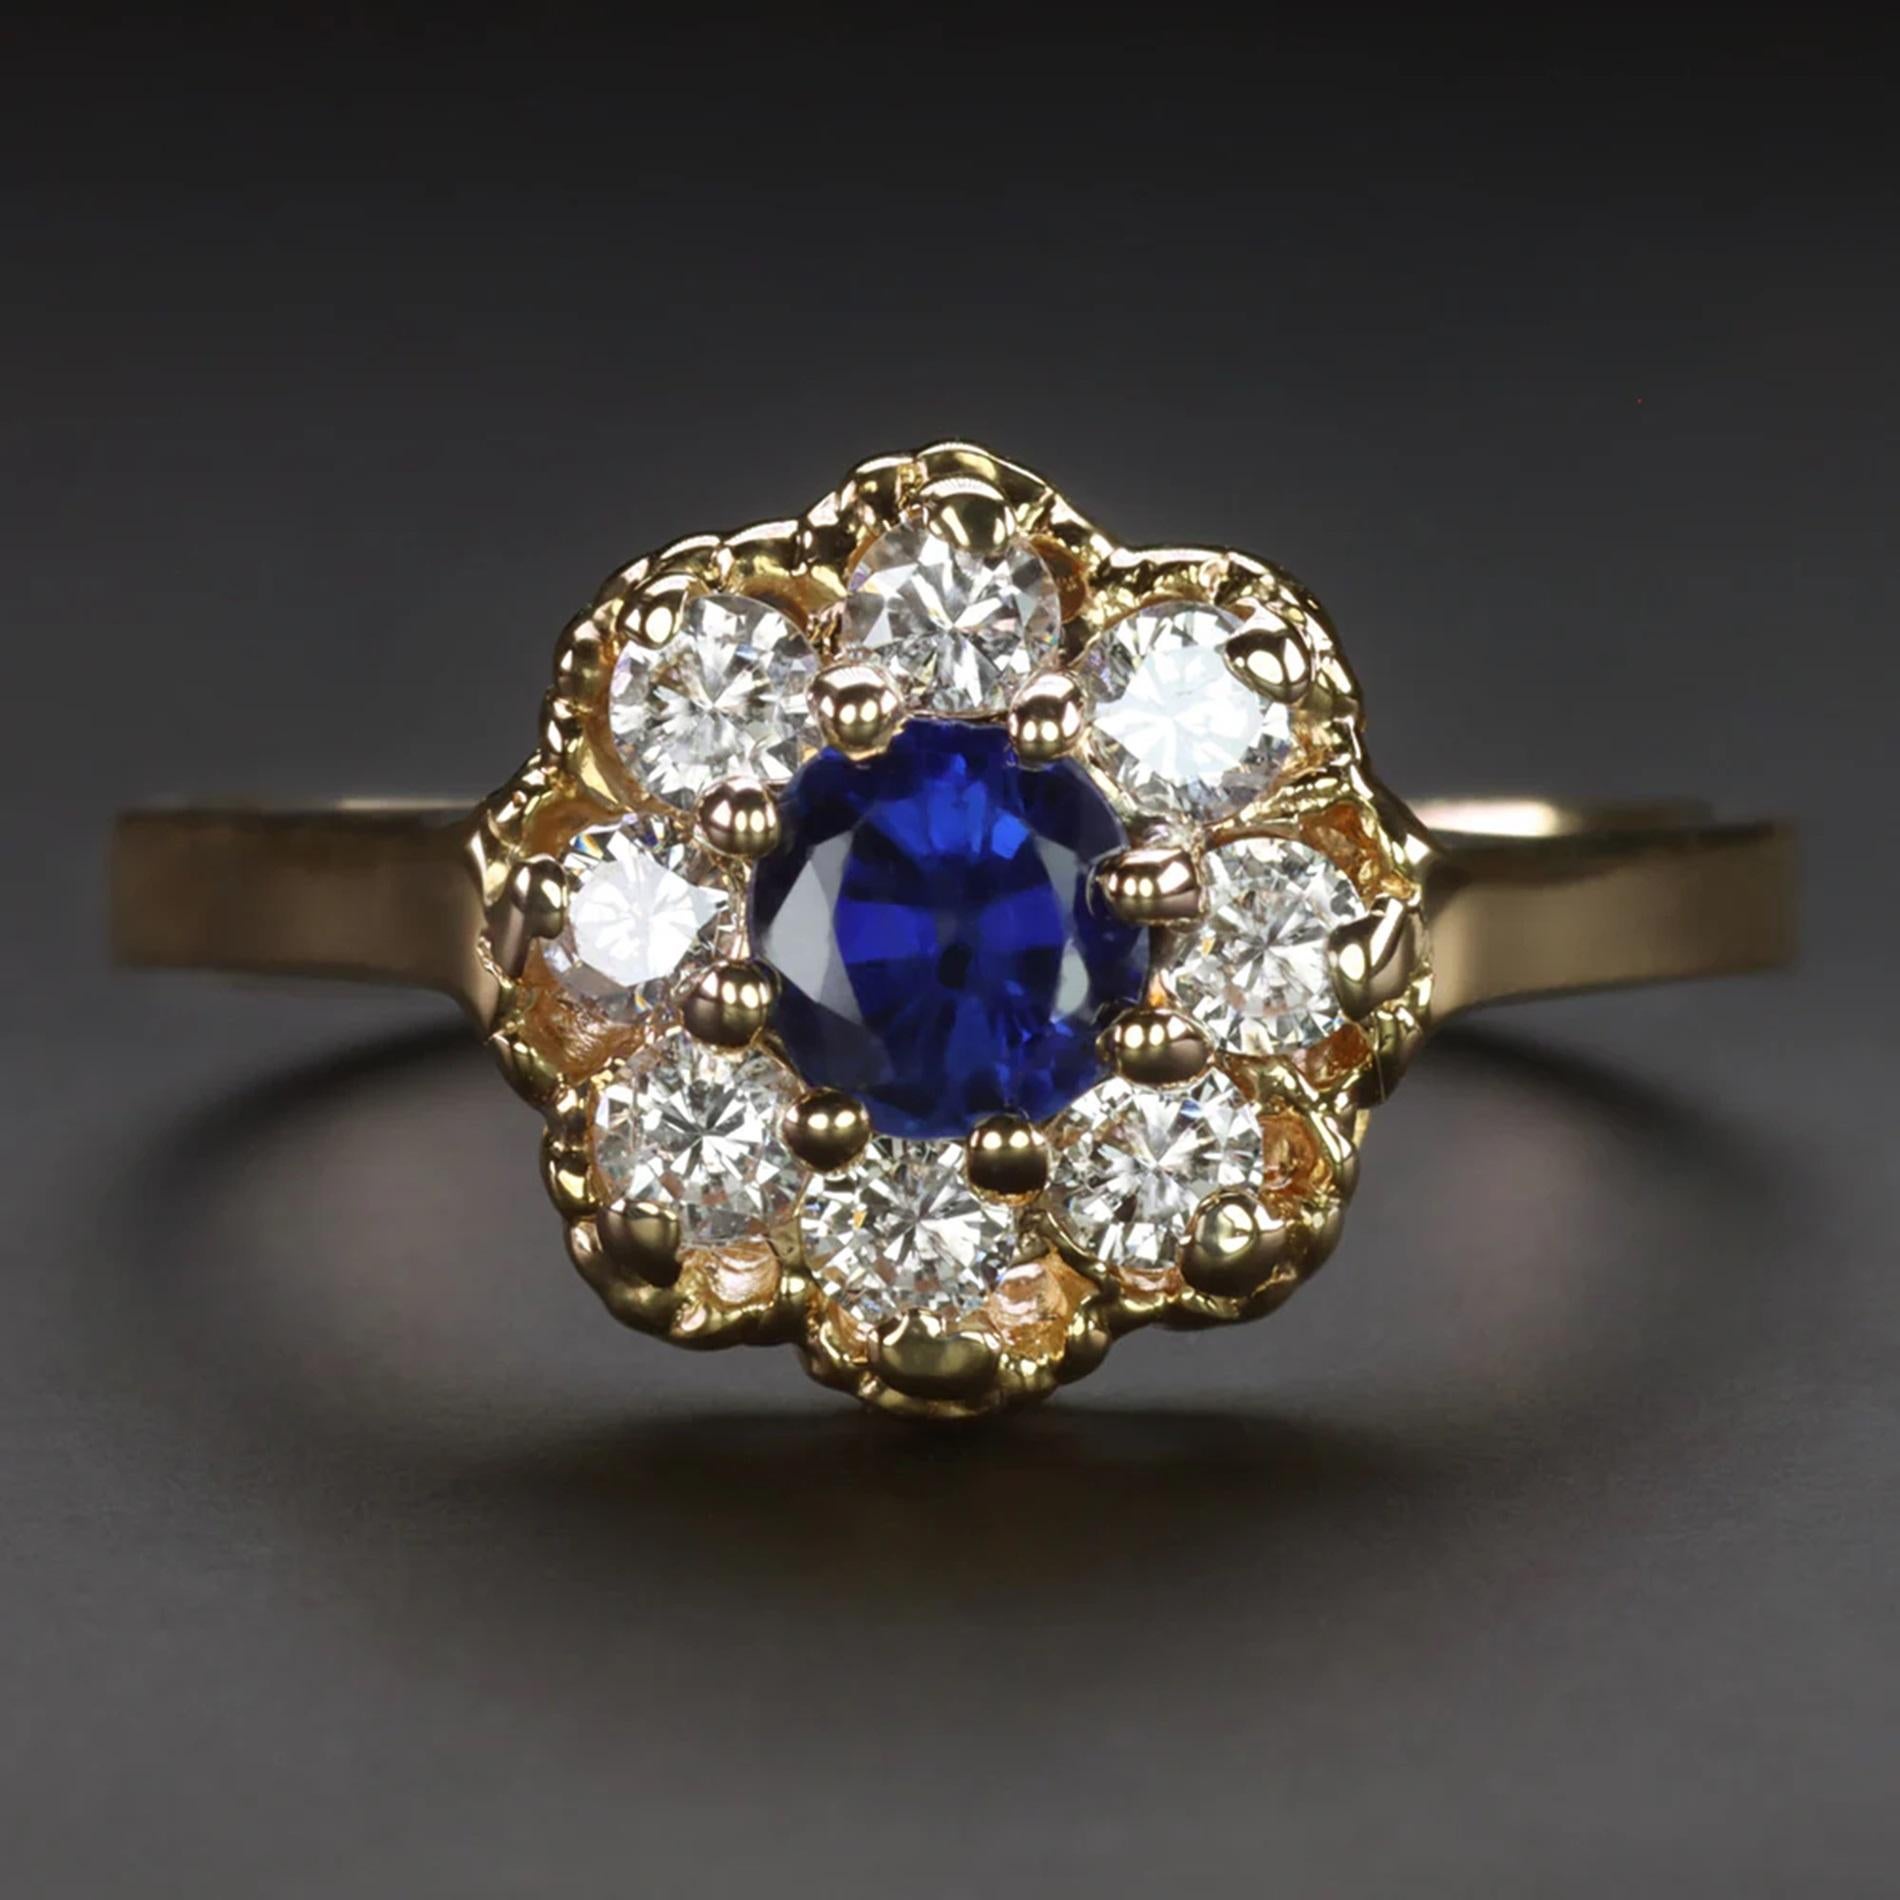 Introducing a captivating sapphire and diamond ring boasting a timeless design that has stood the test of time. Featuring a luscious blue sapphire embraced by a substantial diamond halo.

Highlighted features include:

A natural sapphire center